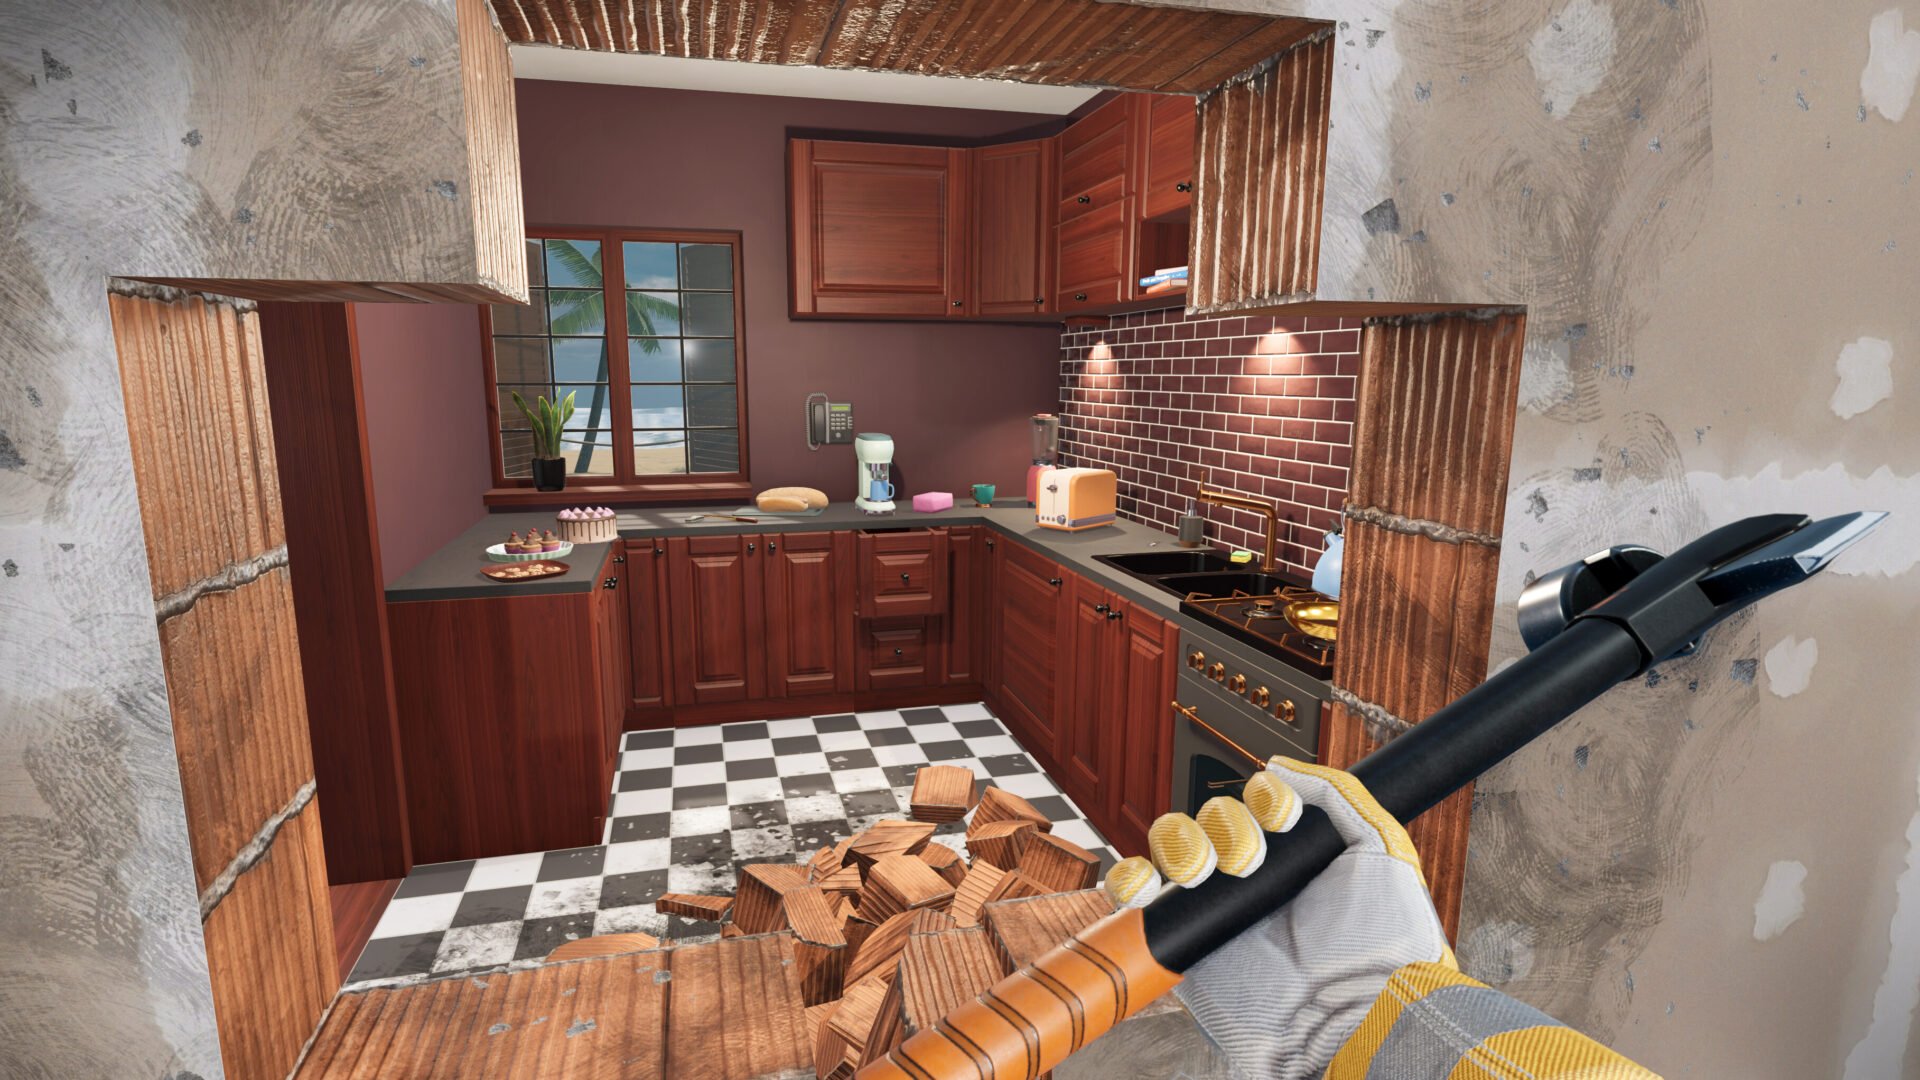 House Flipper 2 confirmed for PS5, Xbox Series, and PC; gameplay